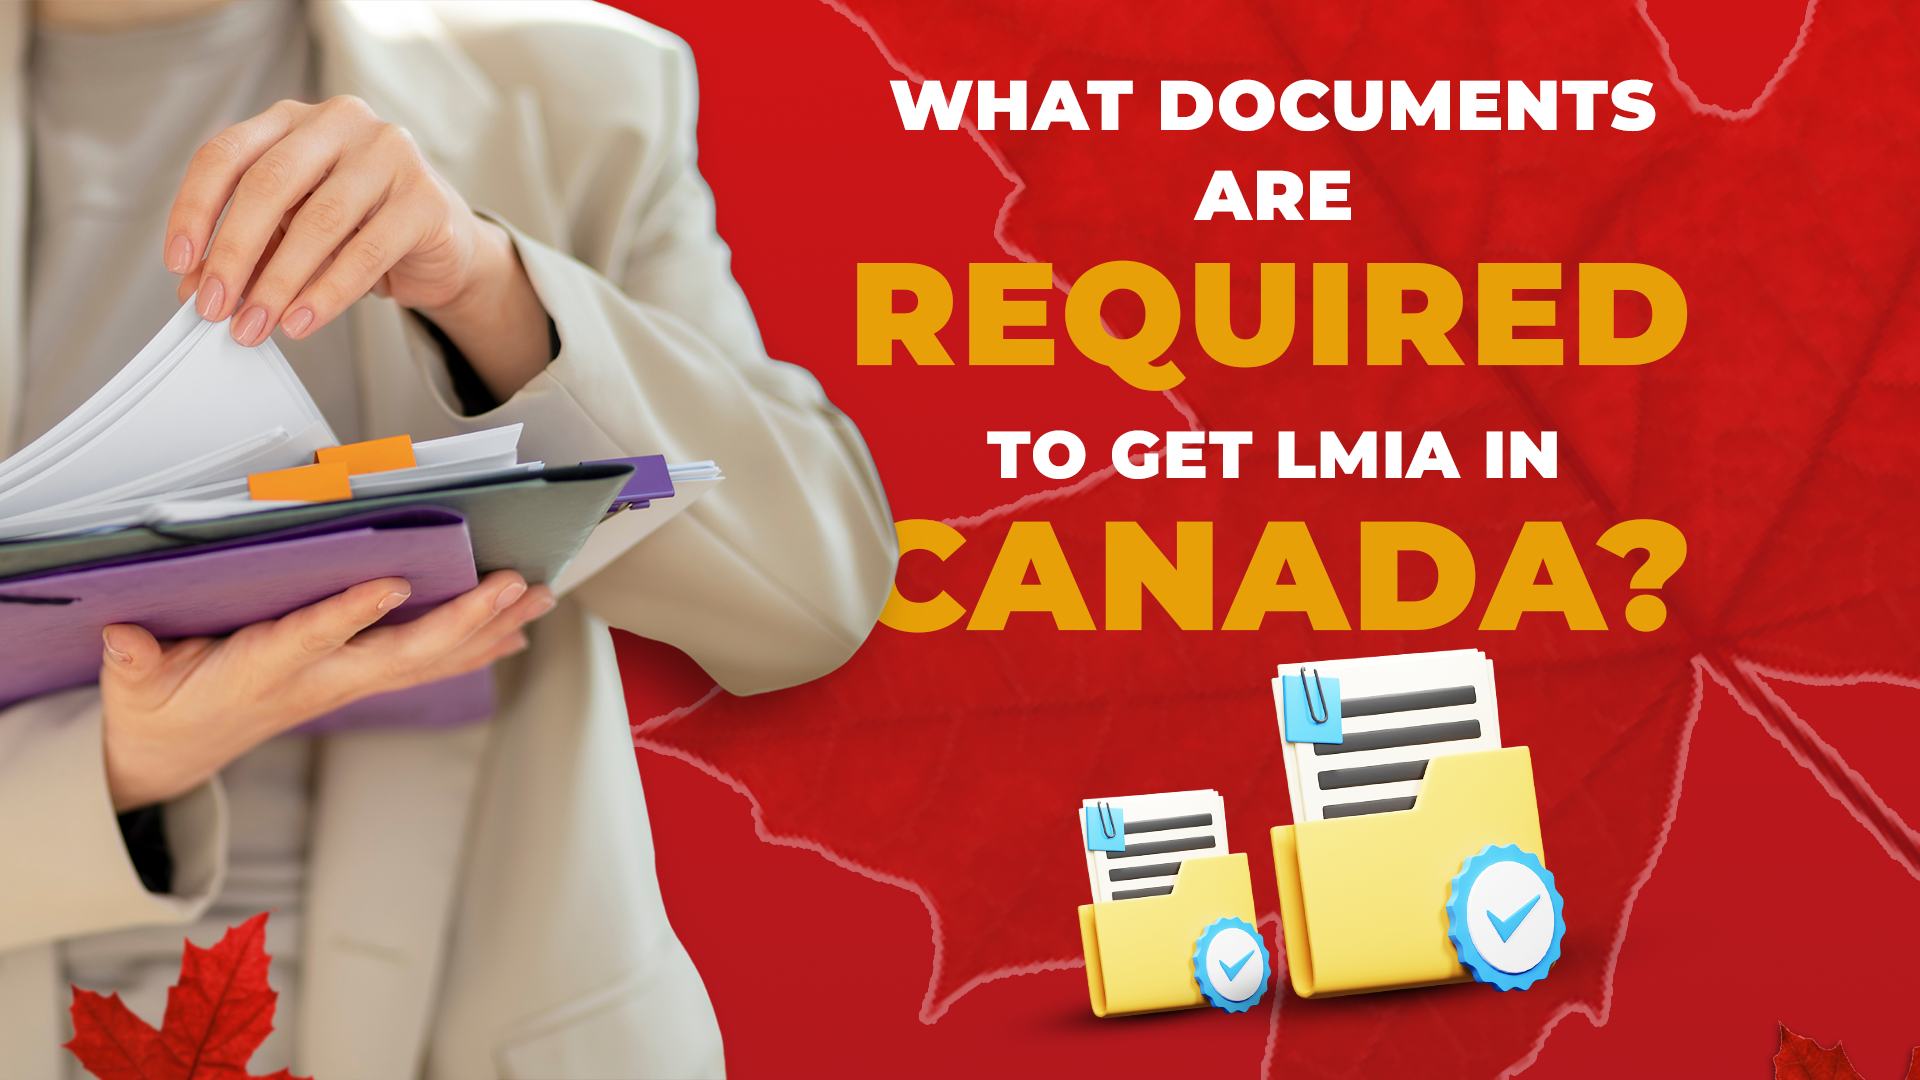 What Documents are Required to get LMIA in Canada?